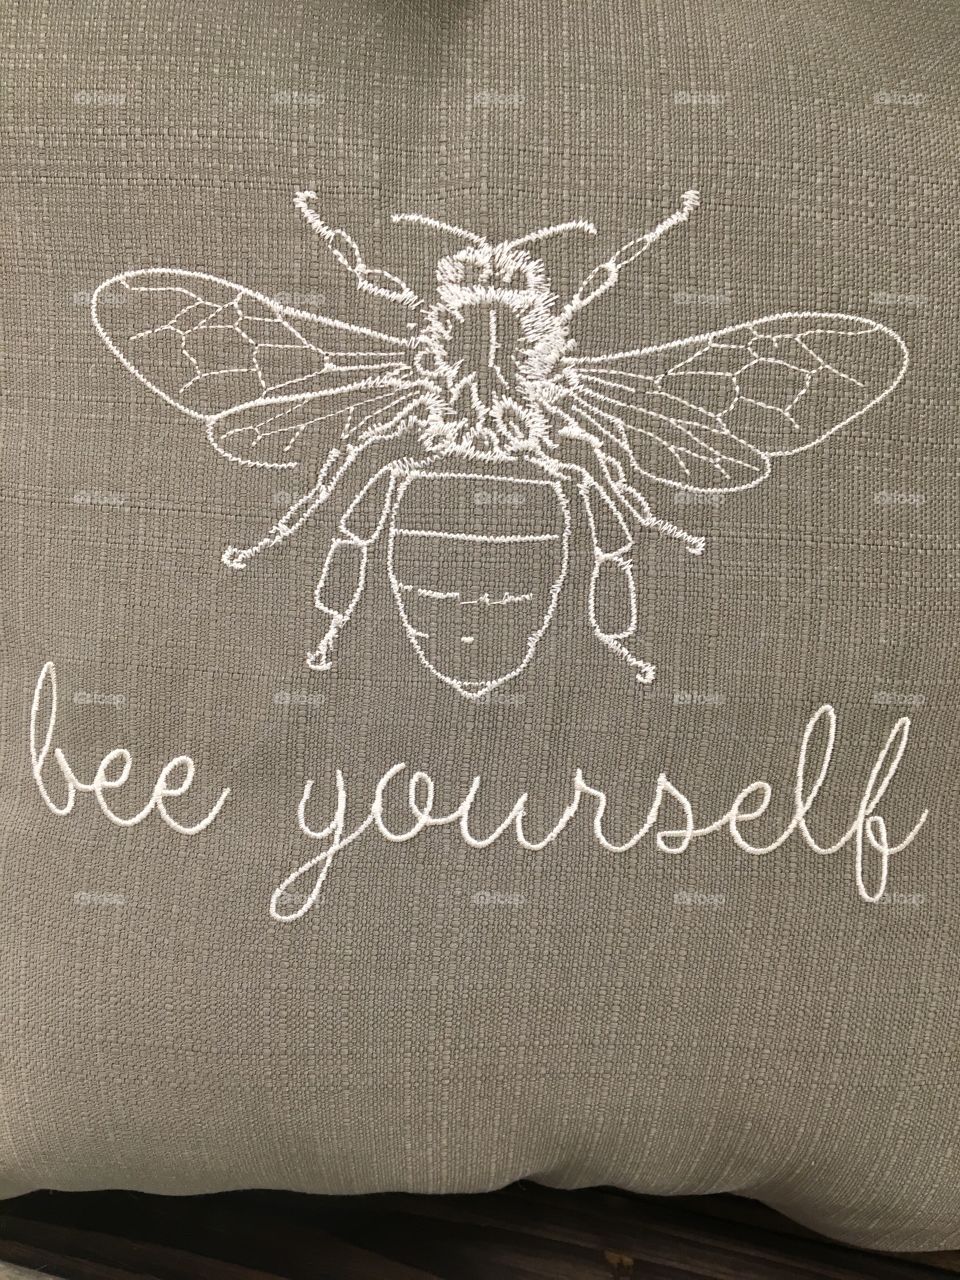 Quote: bee yourself 